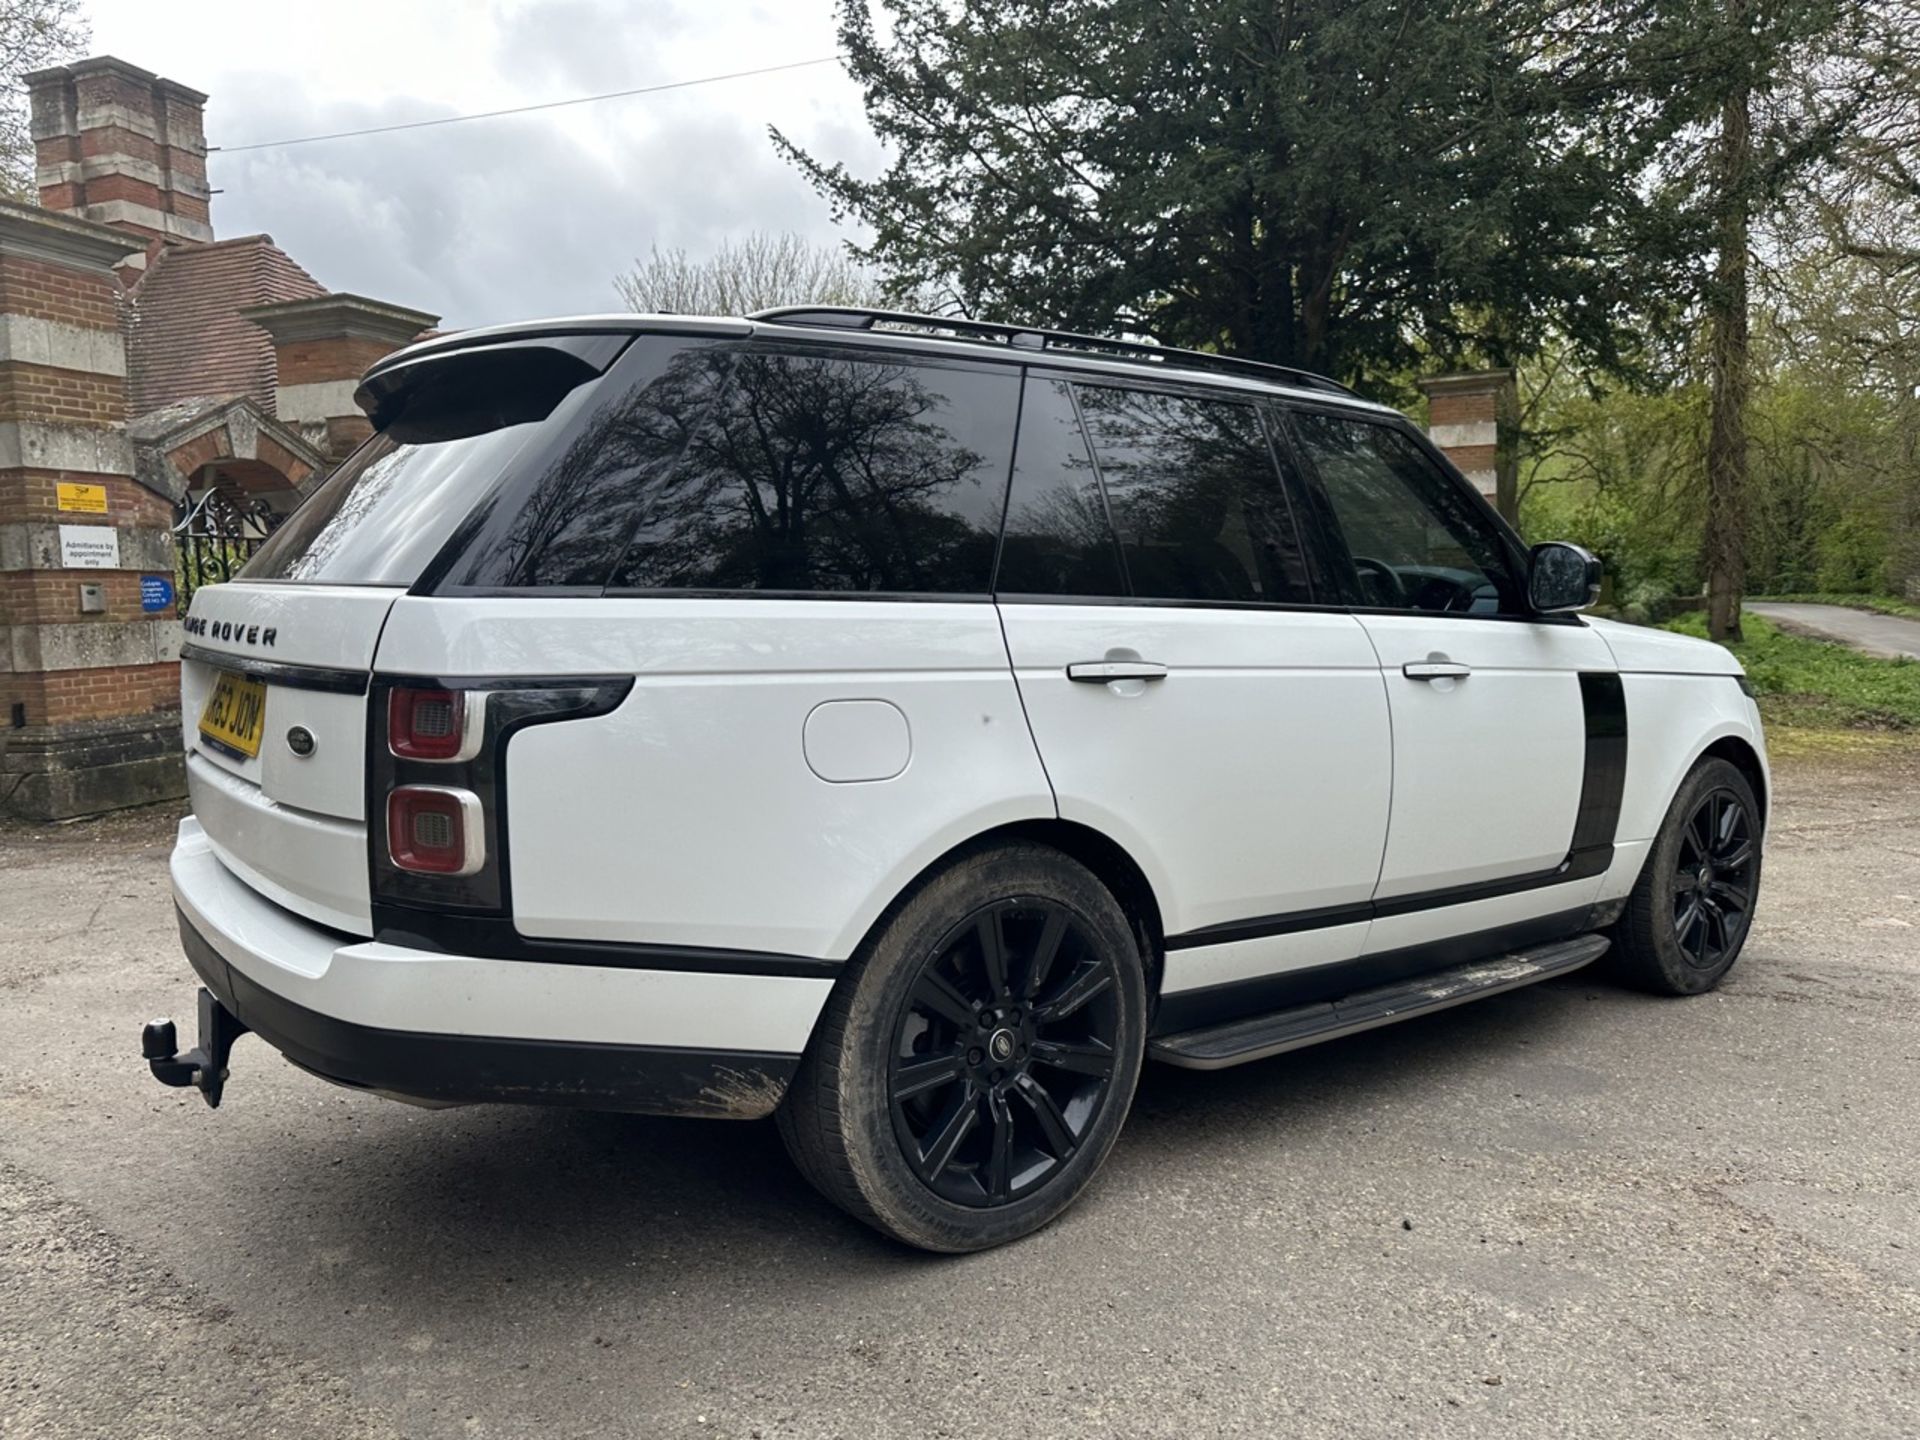 LAND ROVER RANGE ROVER 2.0 P400e Autobiography 4dr Auto - Automatic - 2018 - 31k miles - FULL SH - Image 8 of 17